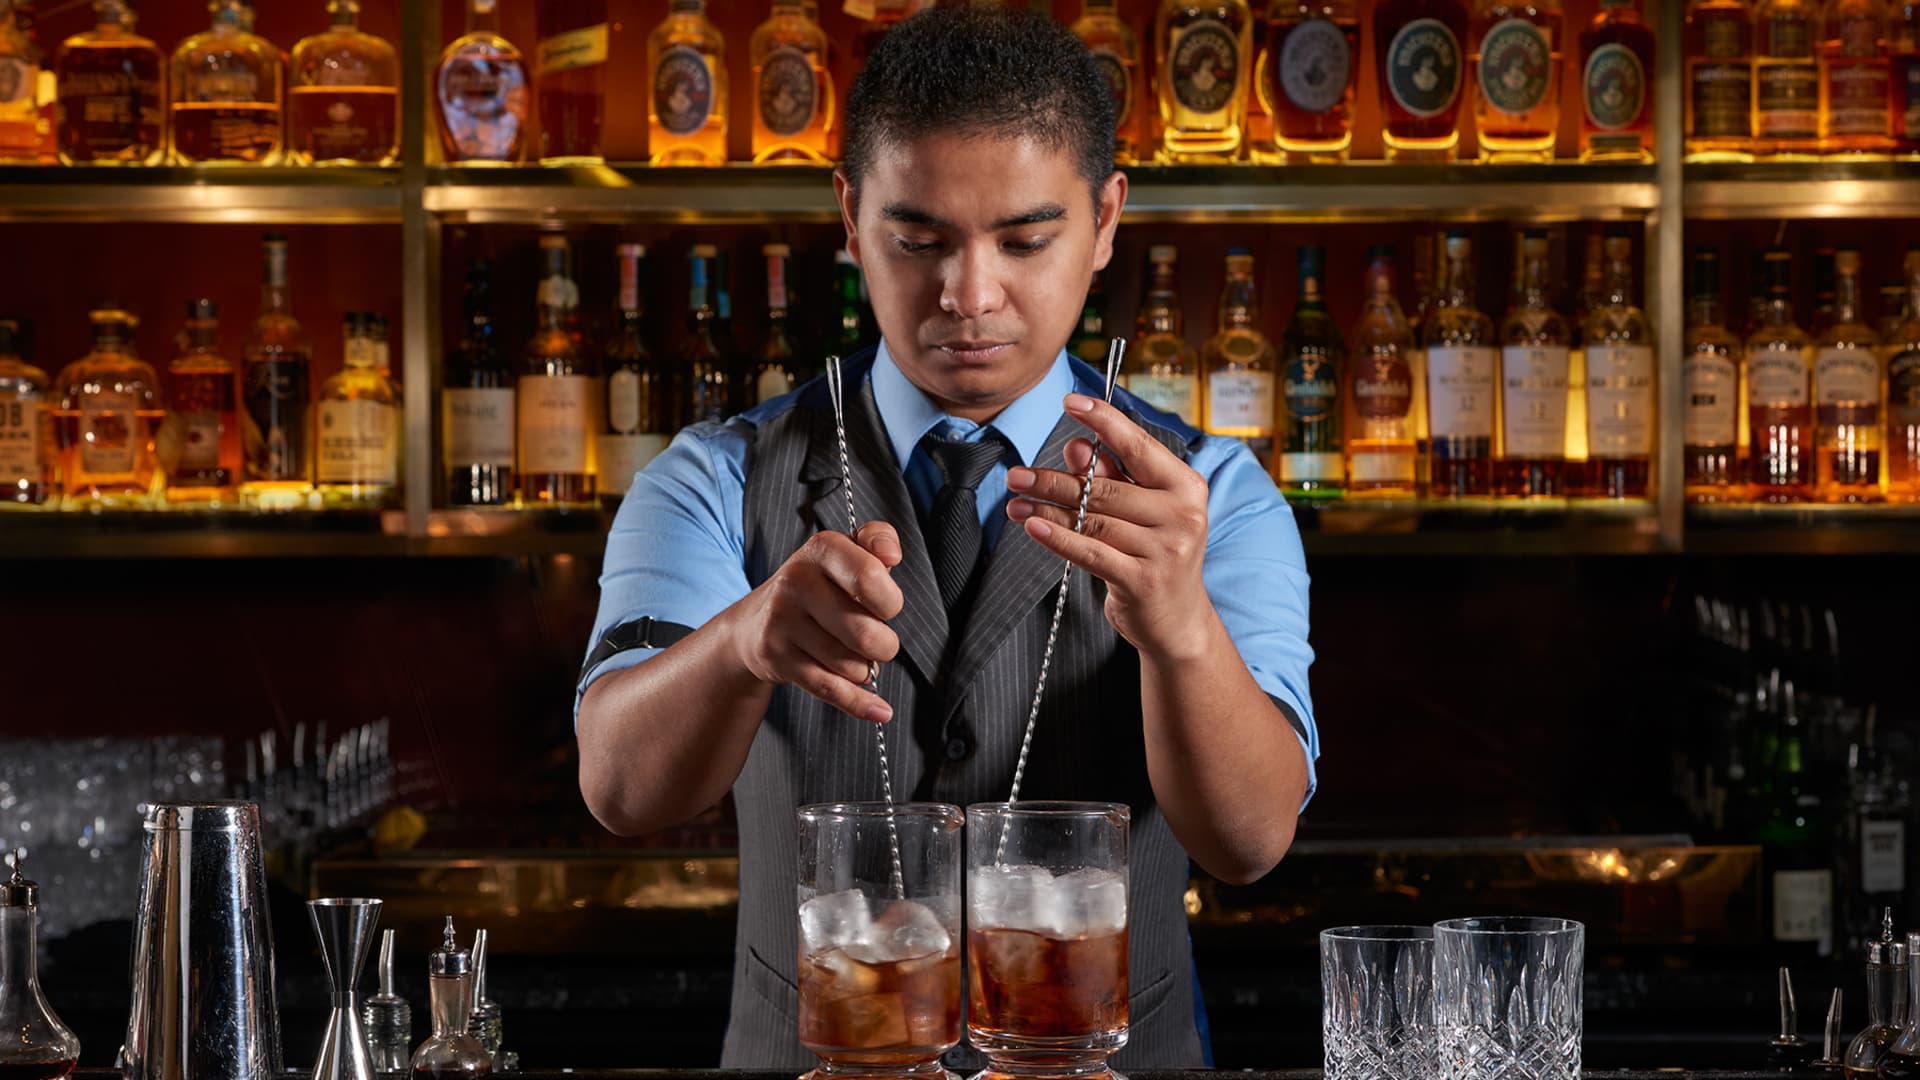 Singapore dominated the bar rankings in Asia, with Manhattan ranking 15th on this year's list.